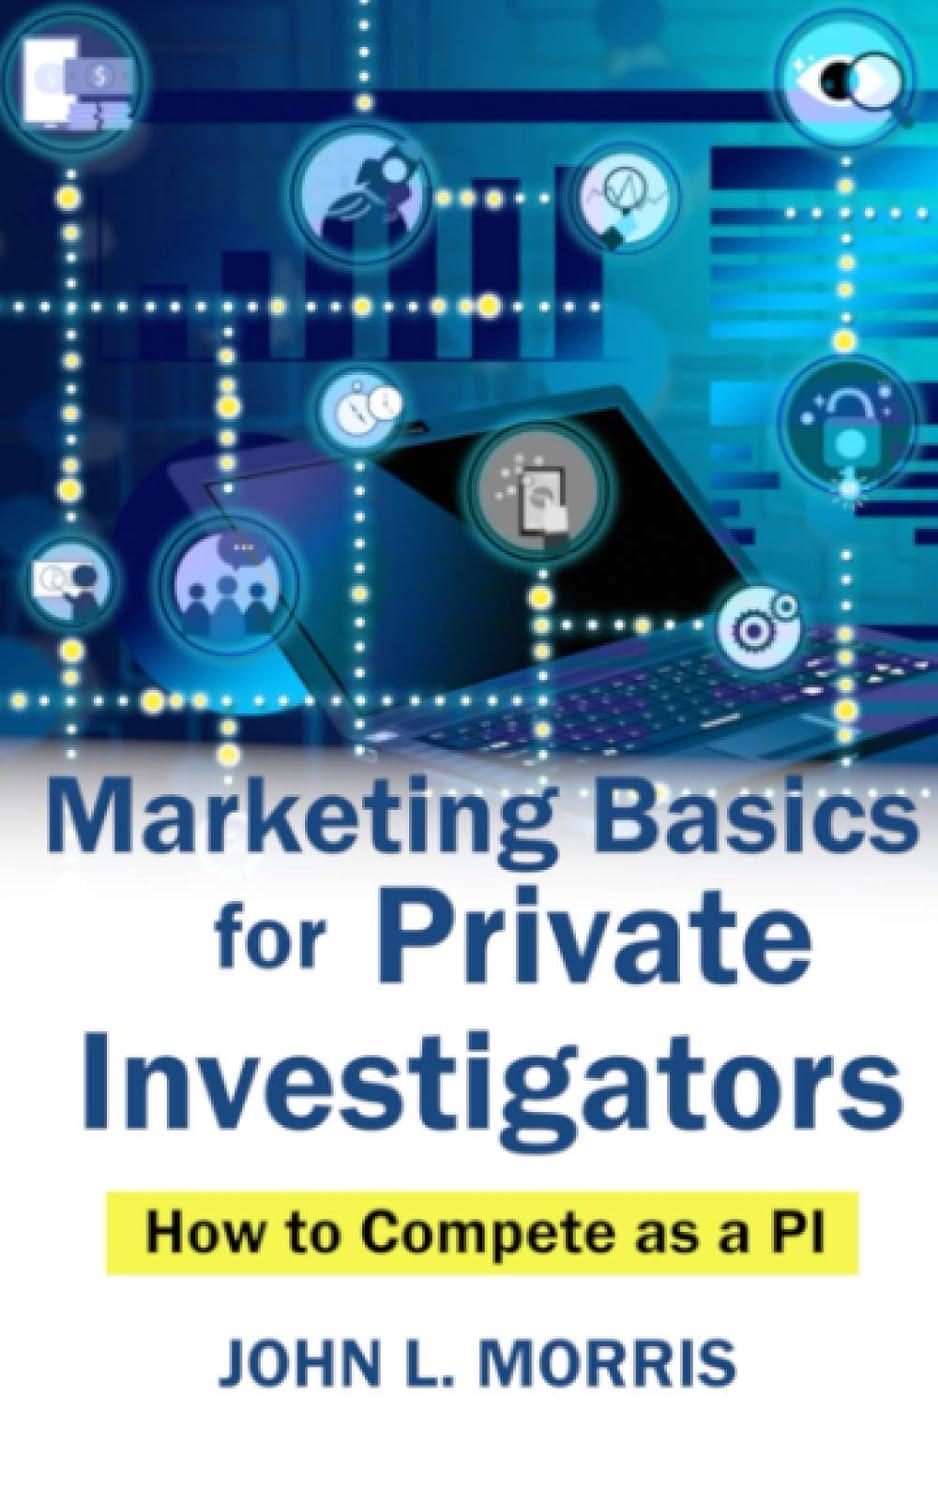 marketing basics for private investigators how to compete as a pi 1st edition john l. morris b08jzrxwlv,